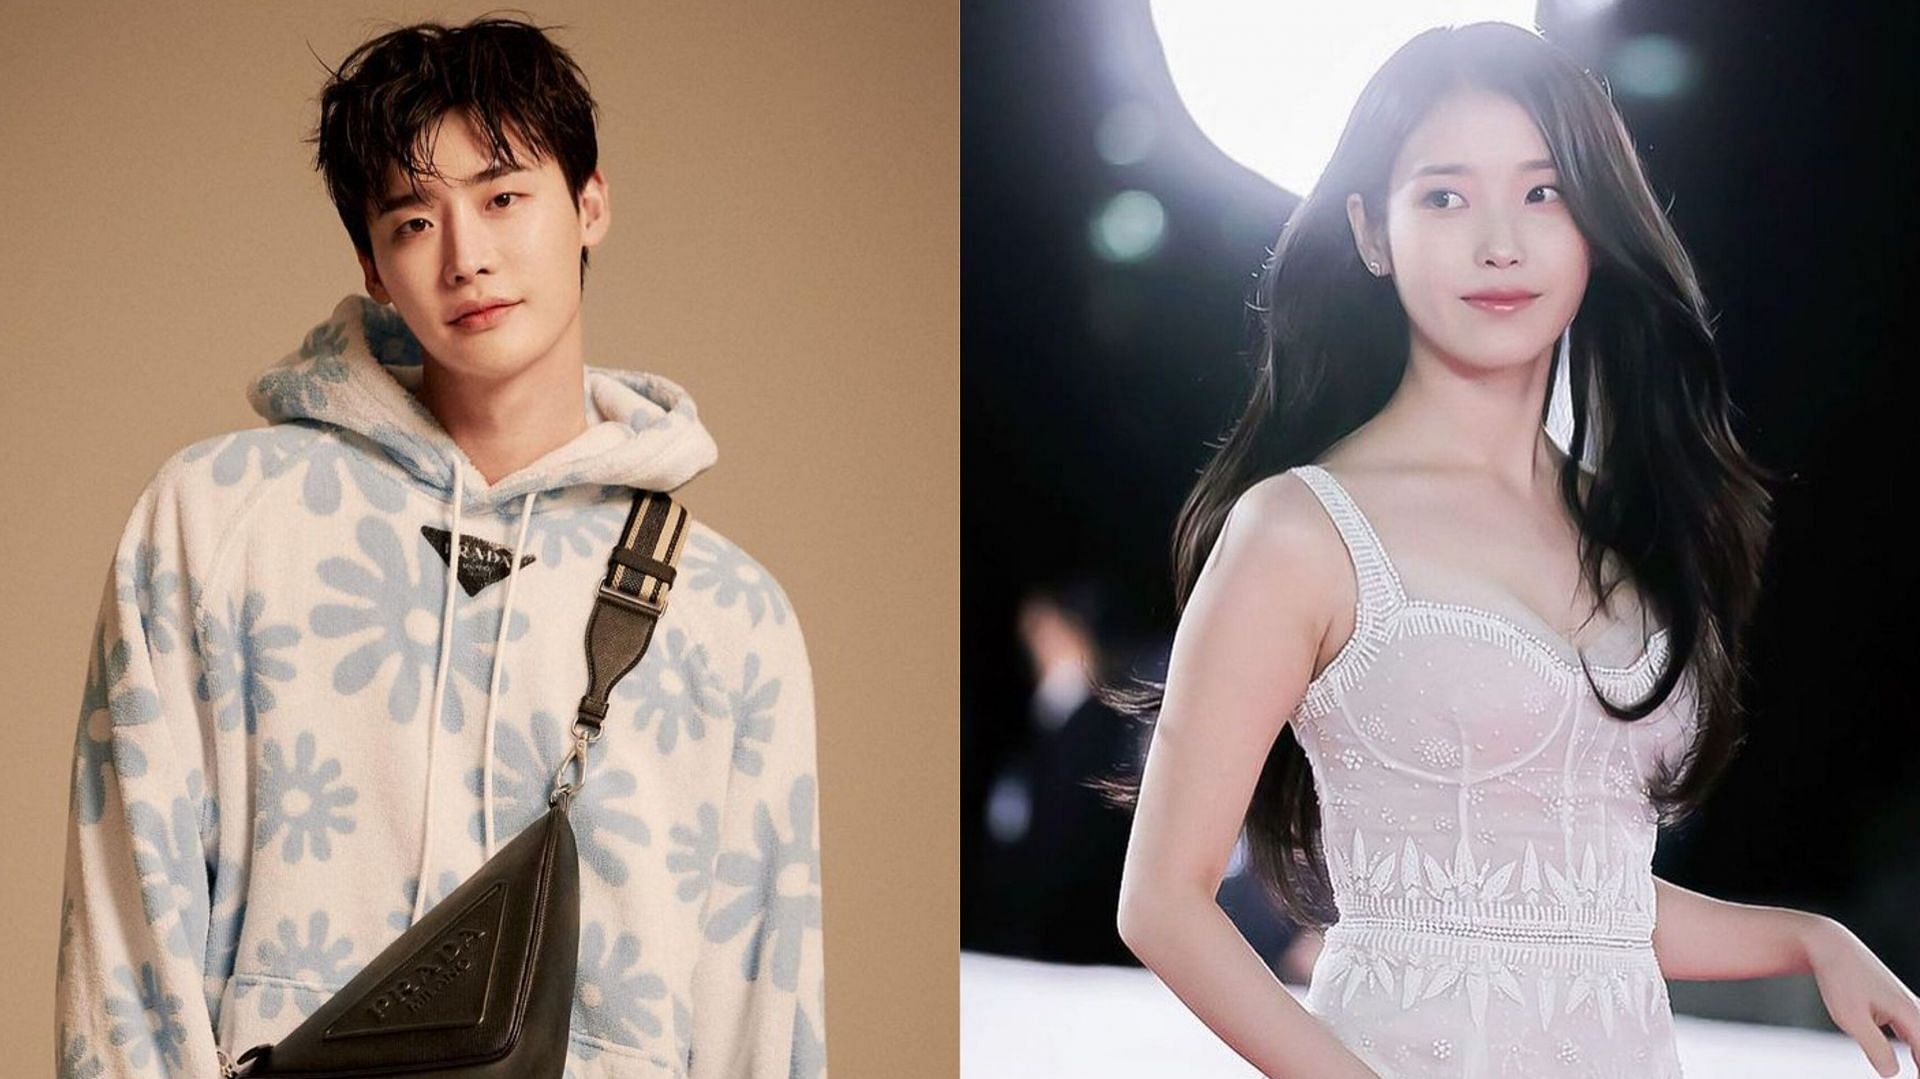 Lee Jong-suk at the IU concert too”: Fans react as the actor is spotted  wearing The Golden Hour merchandise